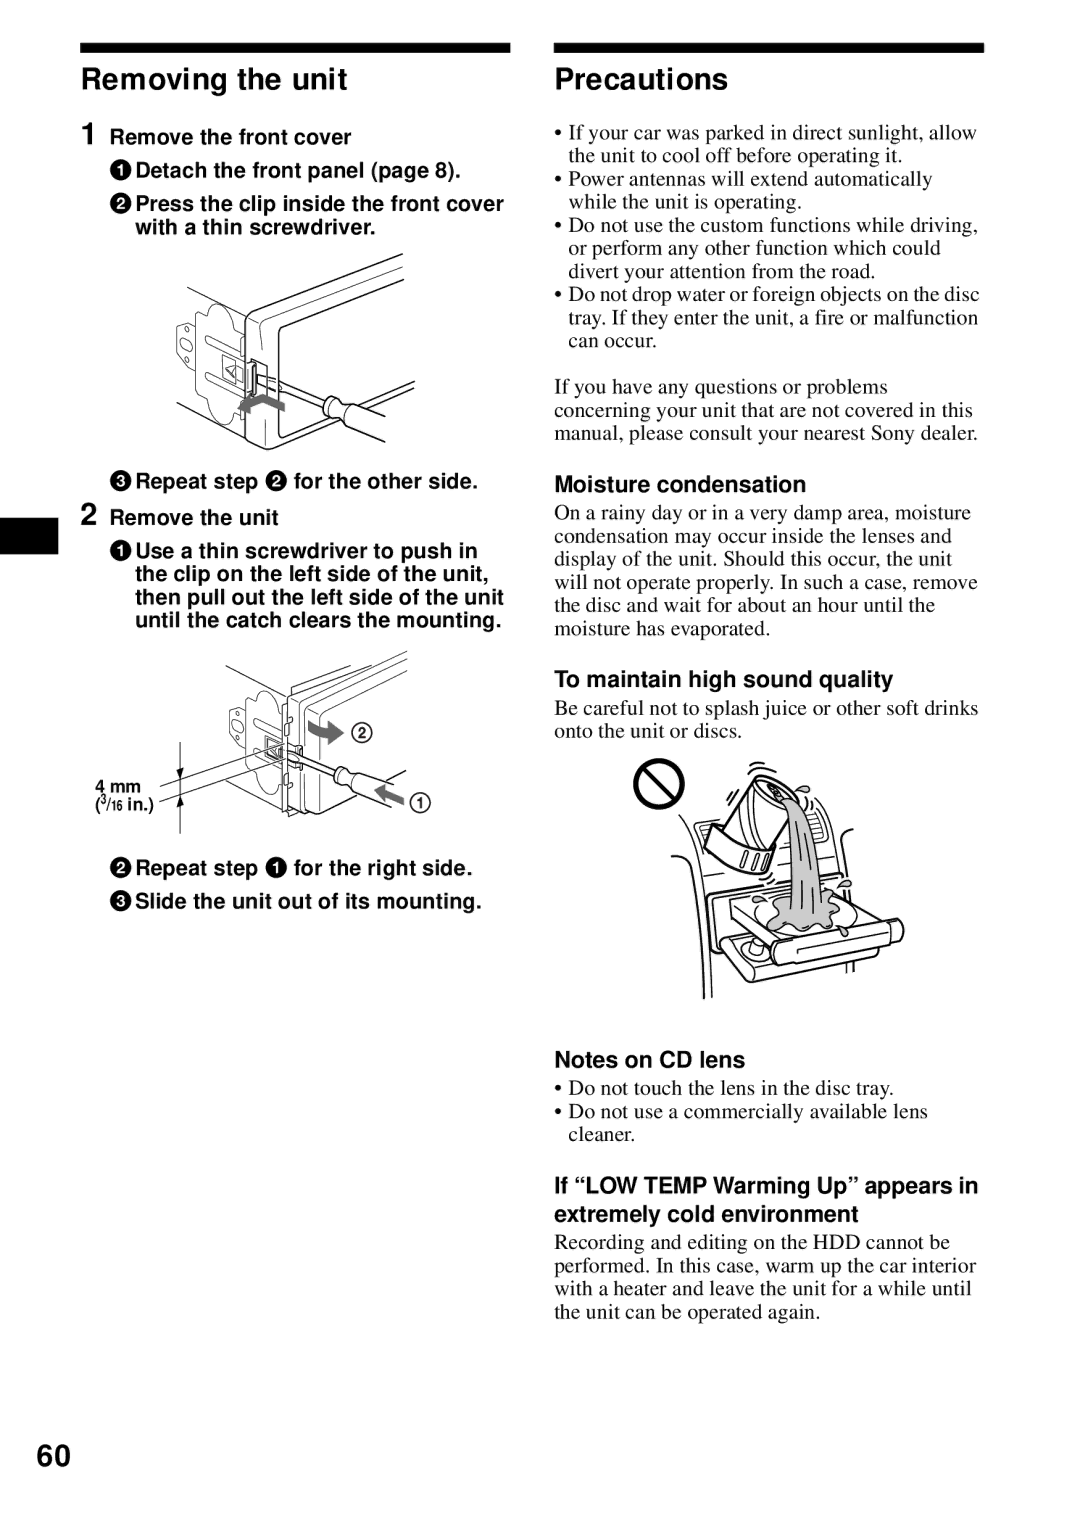 Sony MEX-1HD operating instructions Removing the unit, Precautions, Moisture condensation, To maintain high sound quality 